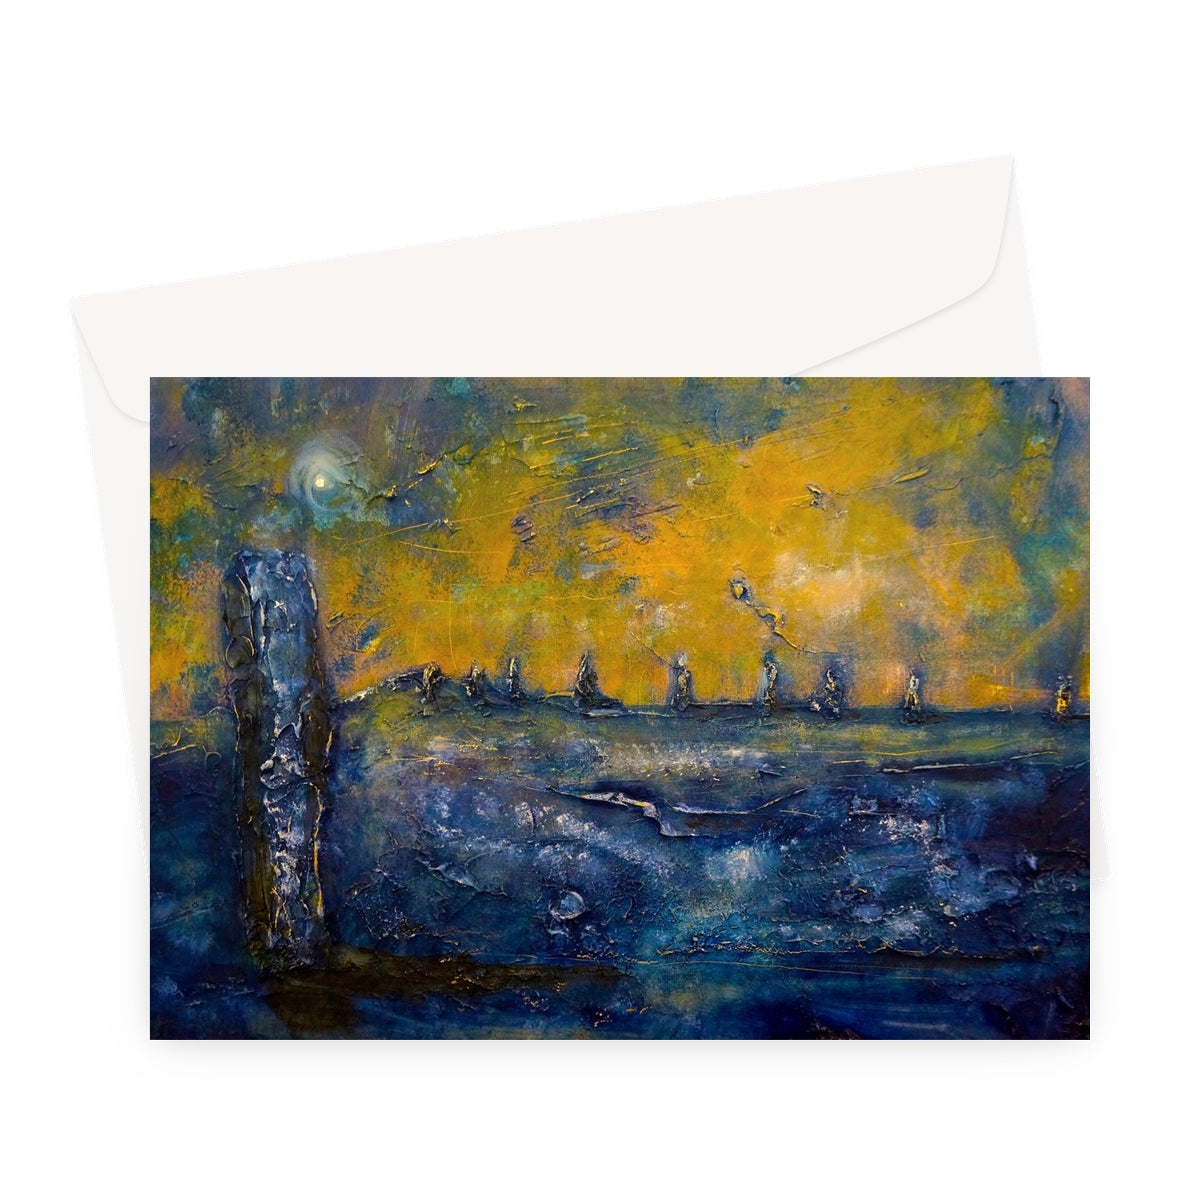 Brodgar Moonlight Orkney Art Gifts Greeting Card-Greetings Cards-Orkney Art Gallery-A5 Landscape-1 Card-Paintings, Prints, Homeware, Art Gifts From Scotland By Scottish Artist Kevin Hunter